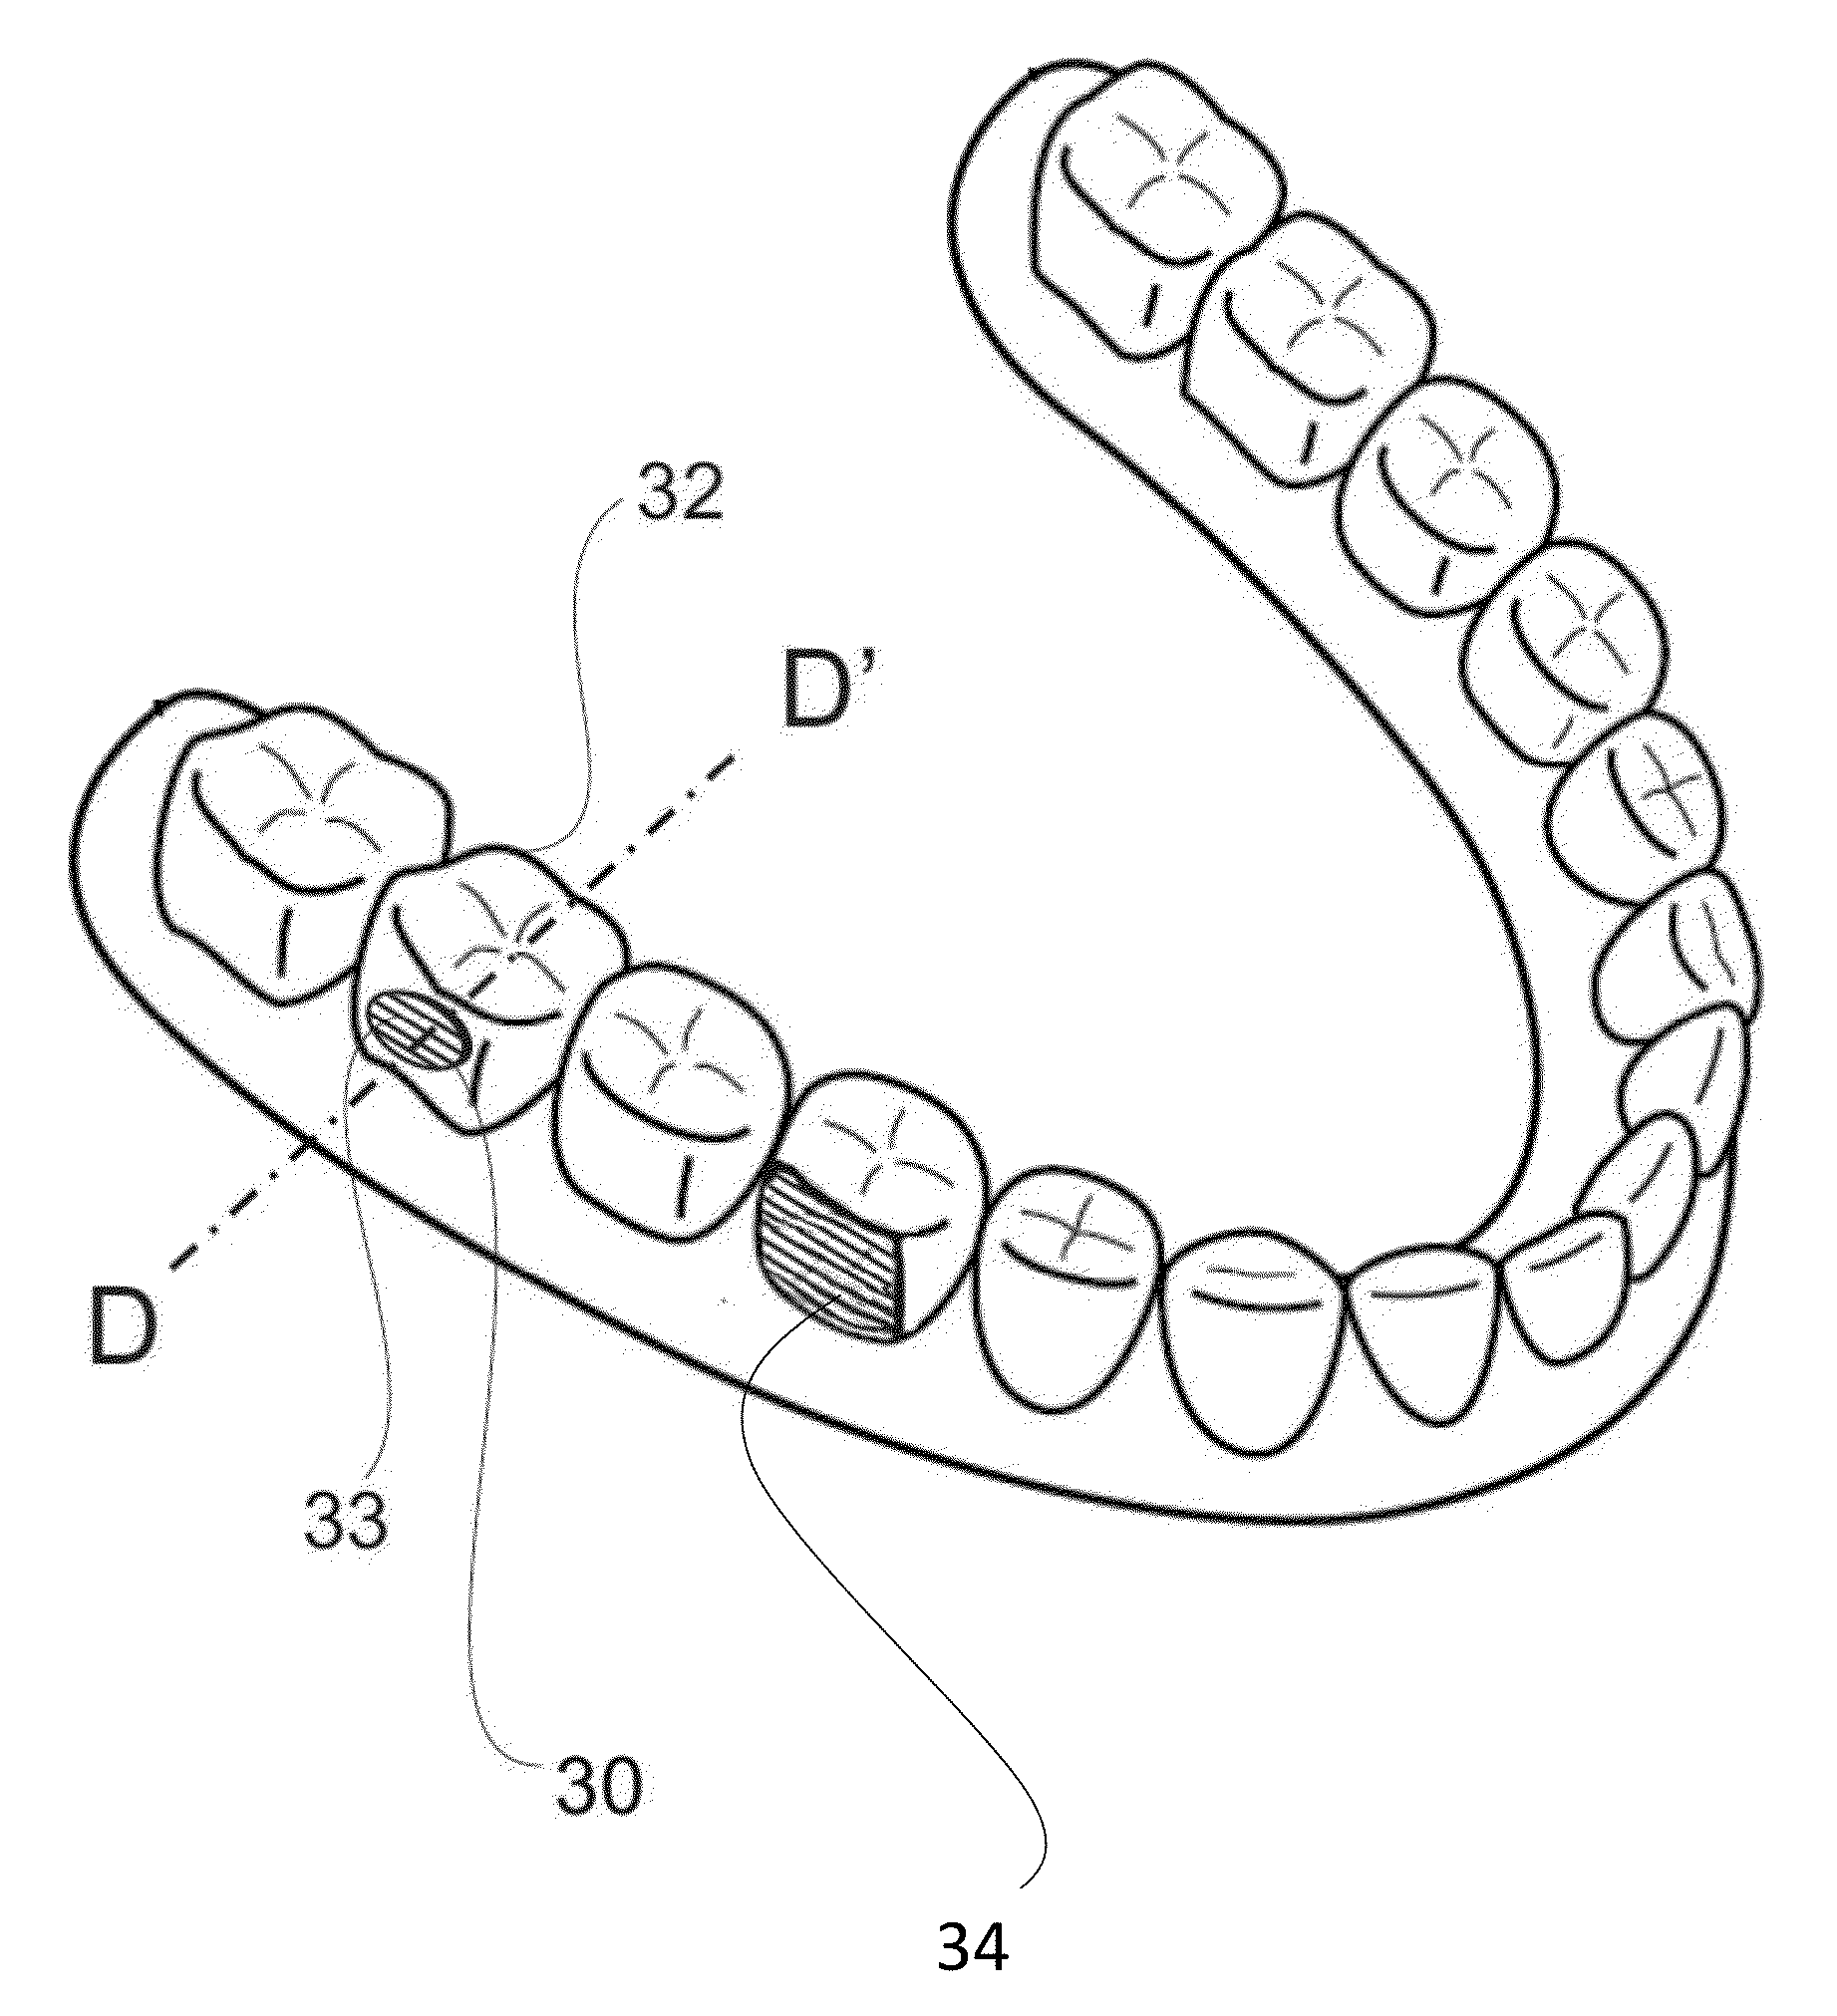 Adhesion pads for fastening an orthodontic aligner